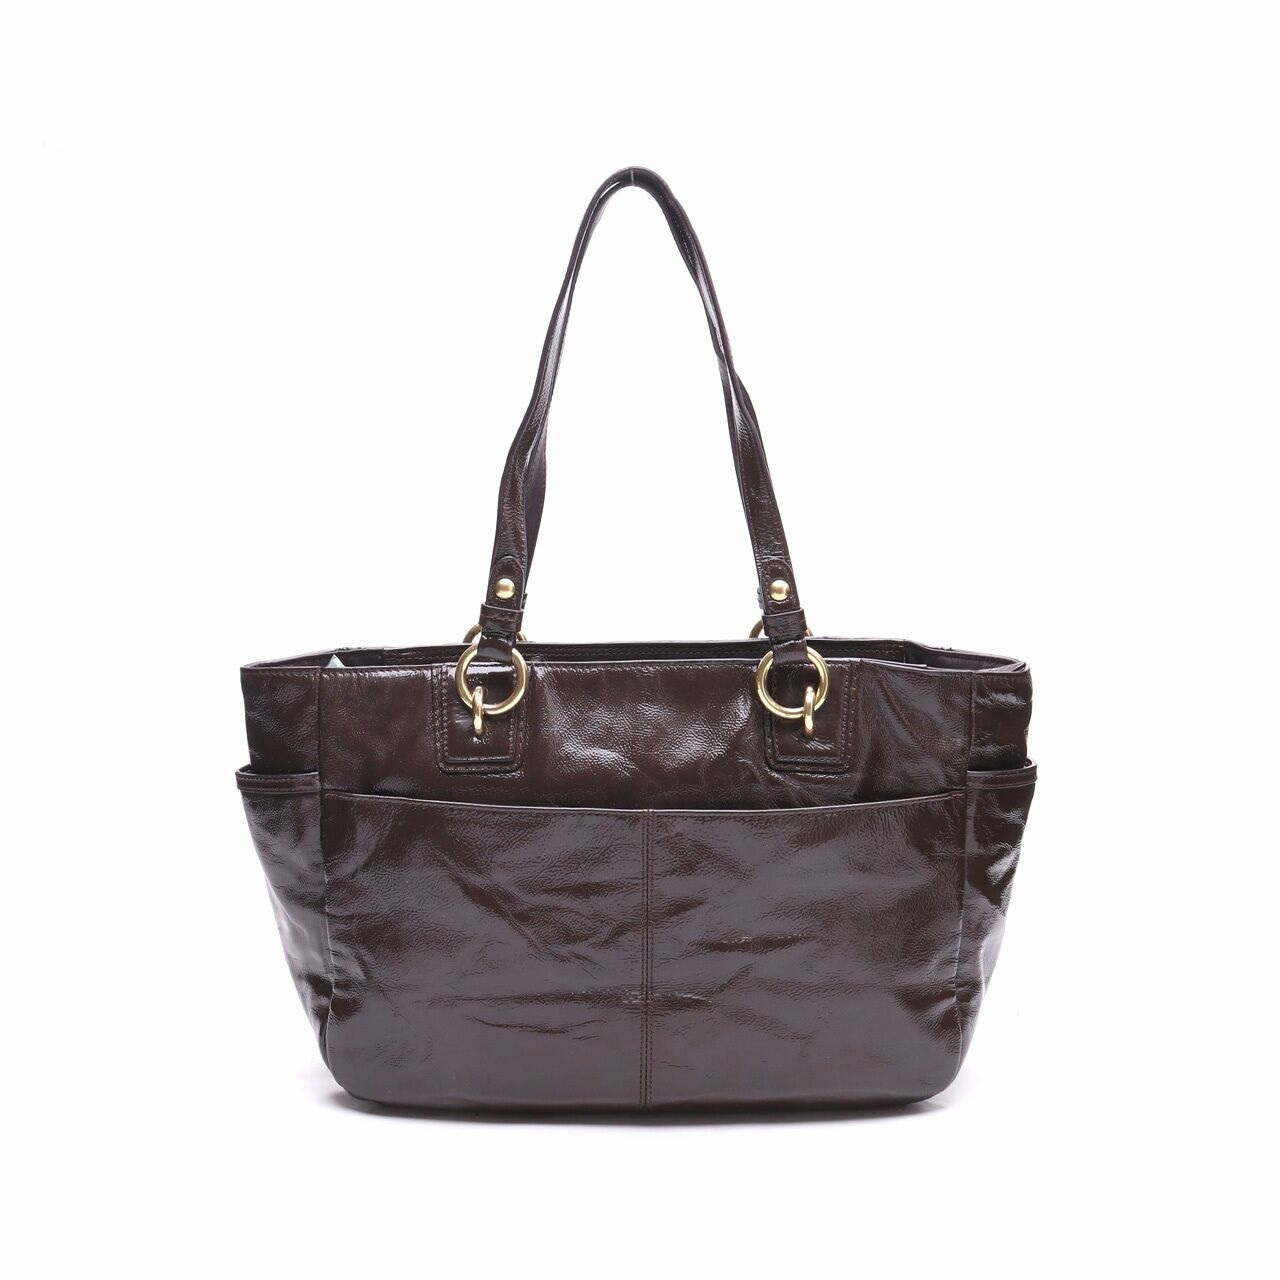 Coach Gallery Brown Patent Leather Tote Bag